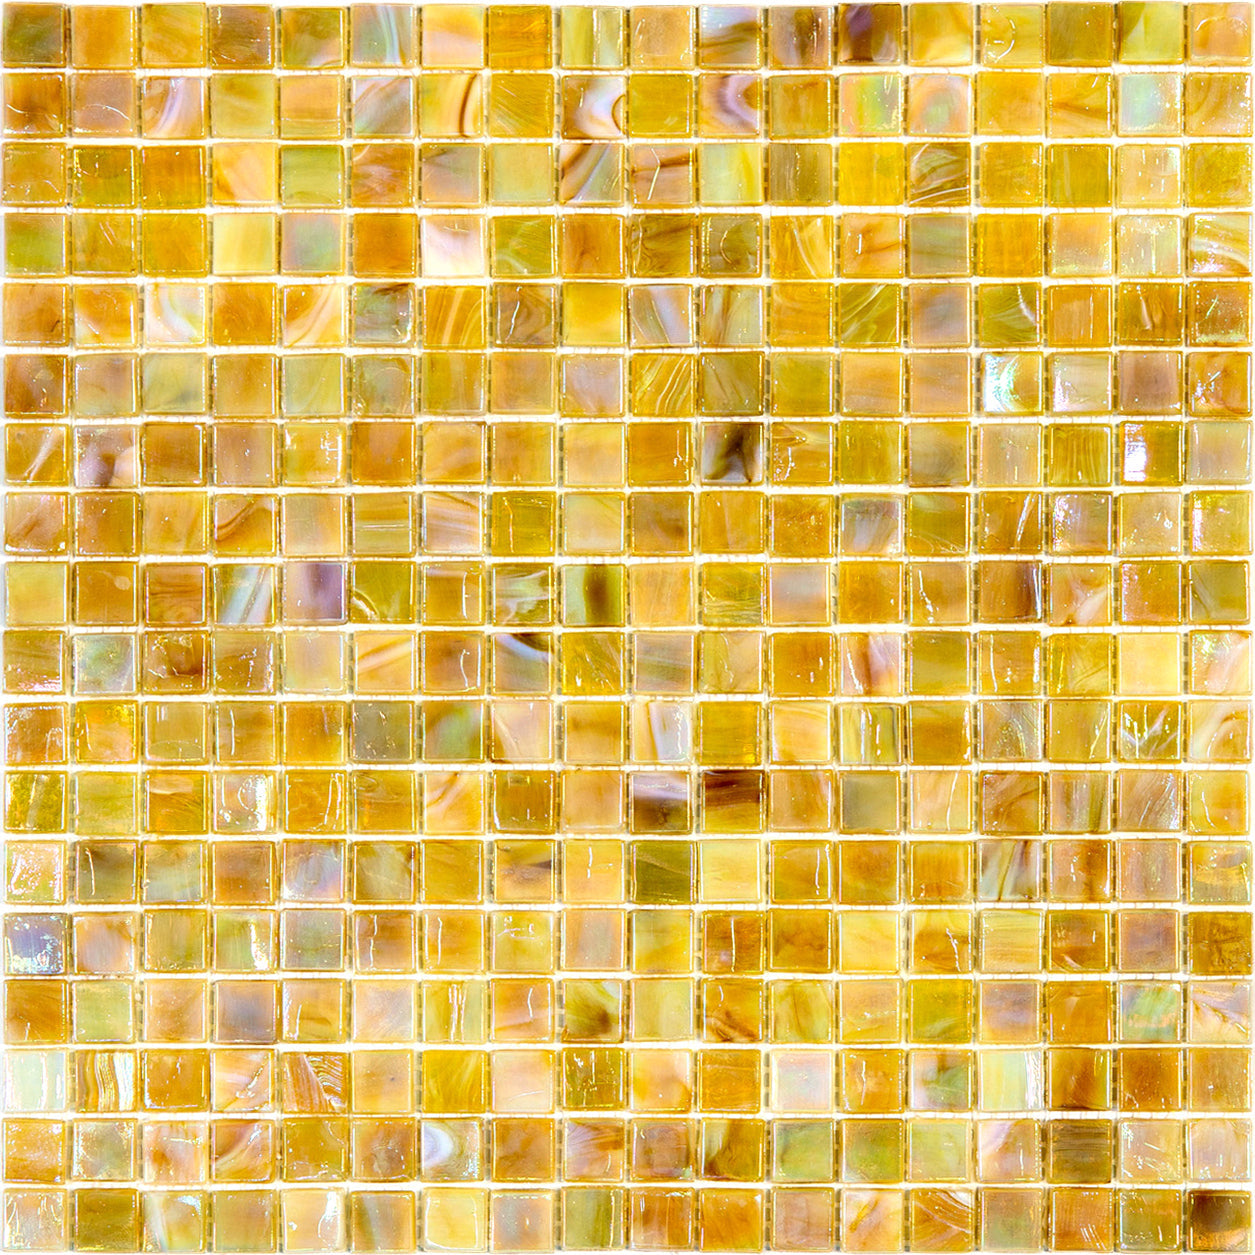 mir alma solid colors 0_6 inch nibble nb0509 wall and floor mosaic distributed by surface group natural materials